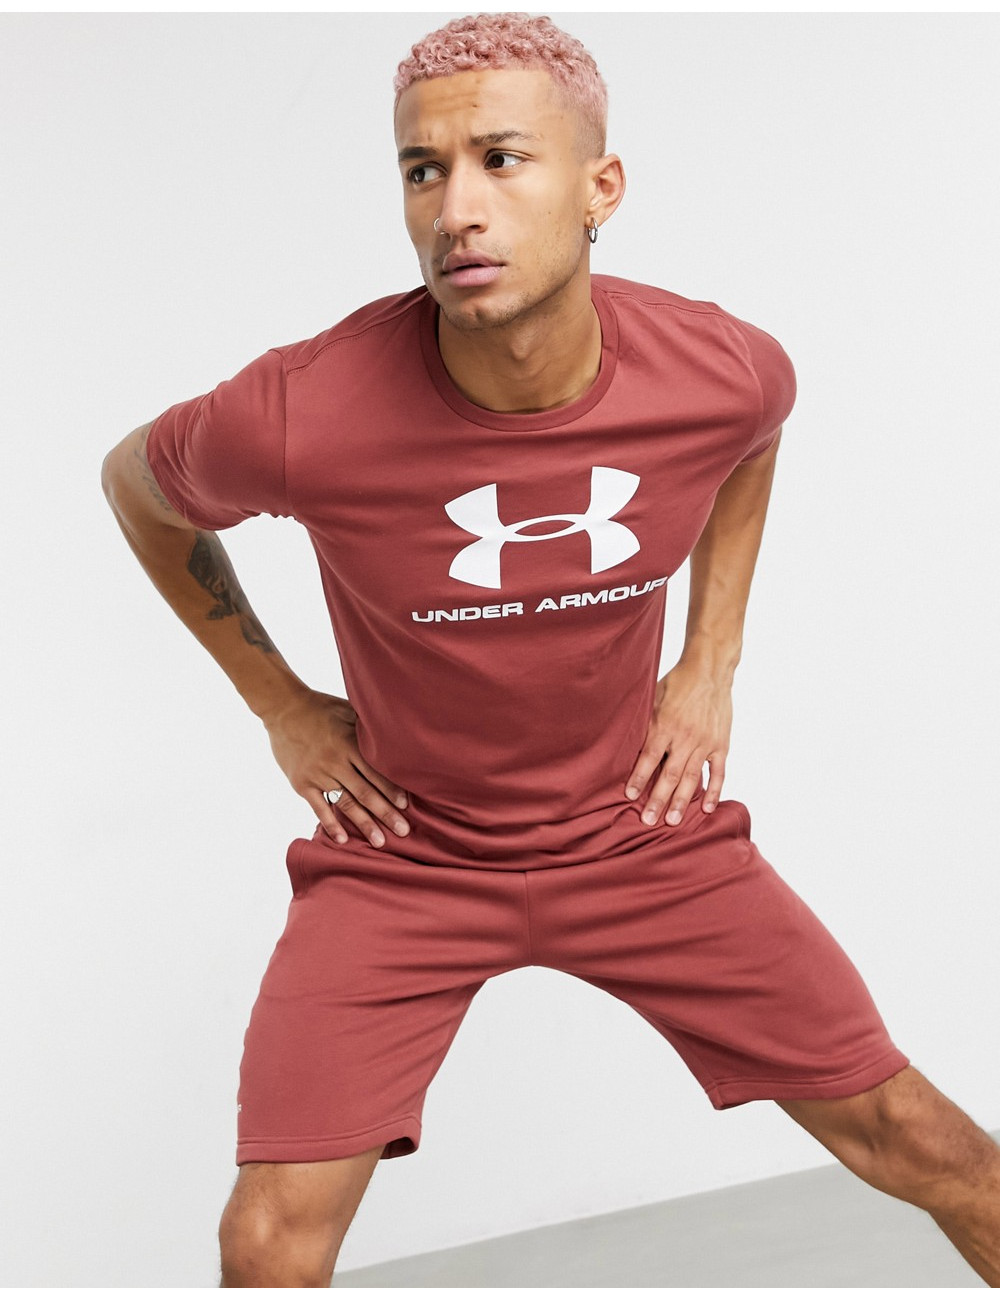 Under Armour t-shirt in red